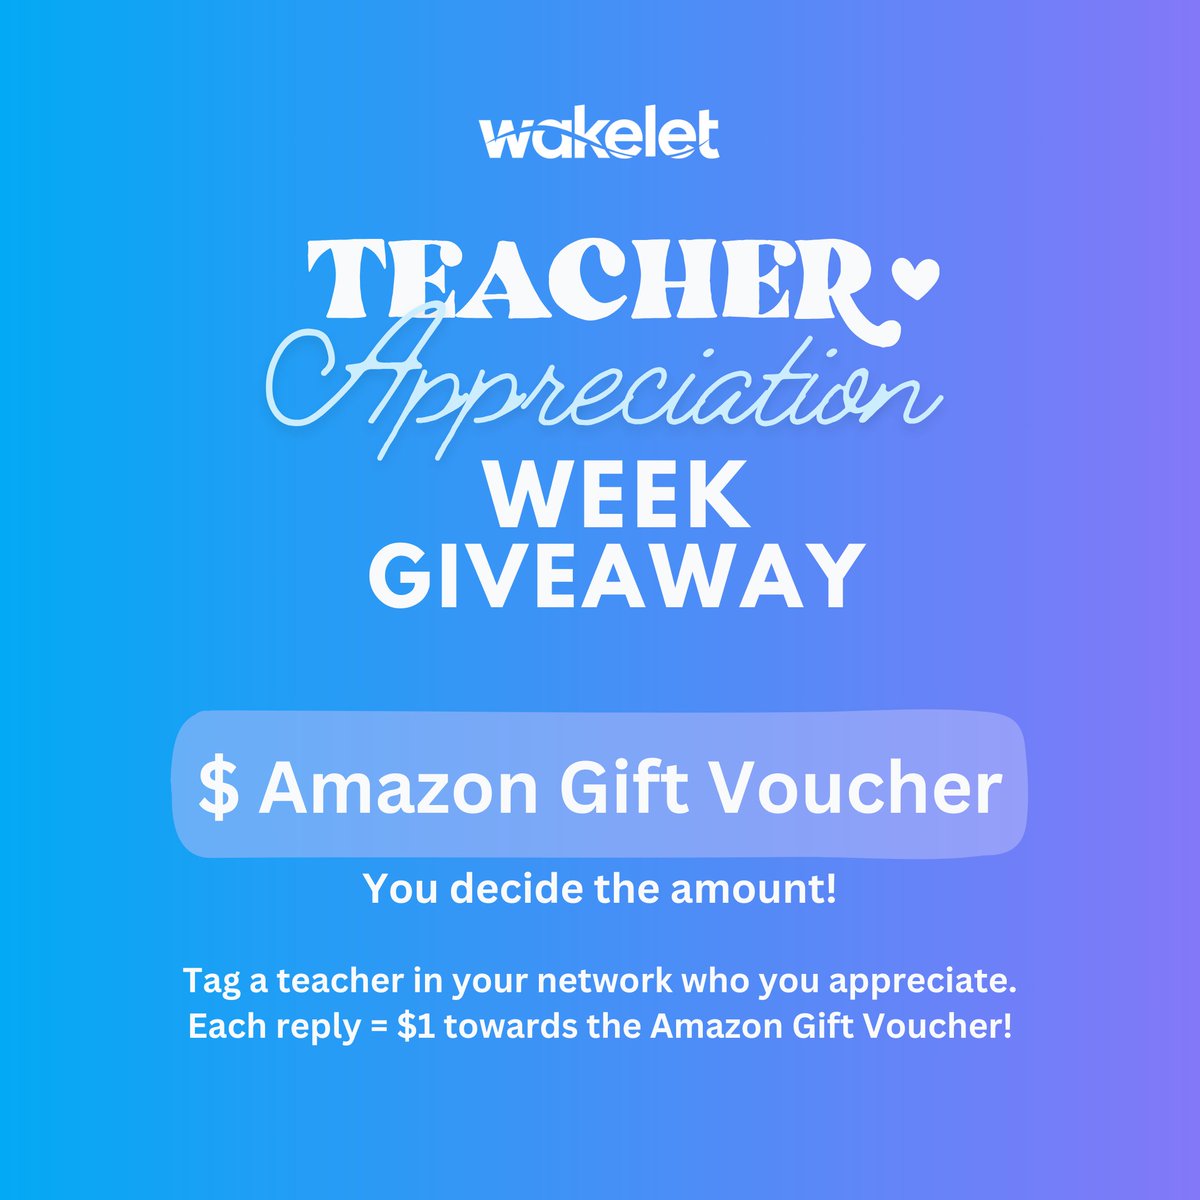 🎉Let’s celebrate #TeacherAppreciationWeek! 🎉 Reply to this tweet and tag a teacher in your network who you appreciate. 💰 Each reply = $1 towards an Amazon Gift Voucher! The total number of replies after 24 hours = total value of the gift card! Winner chosen at random